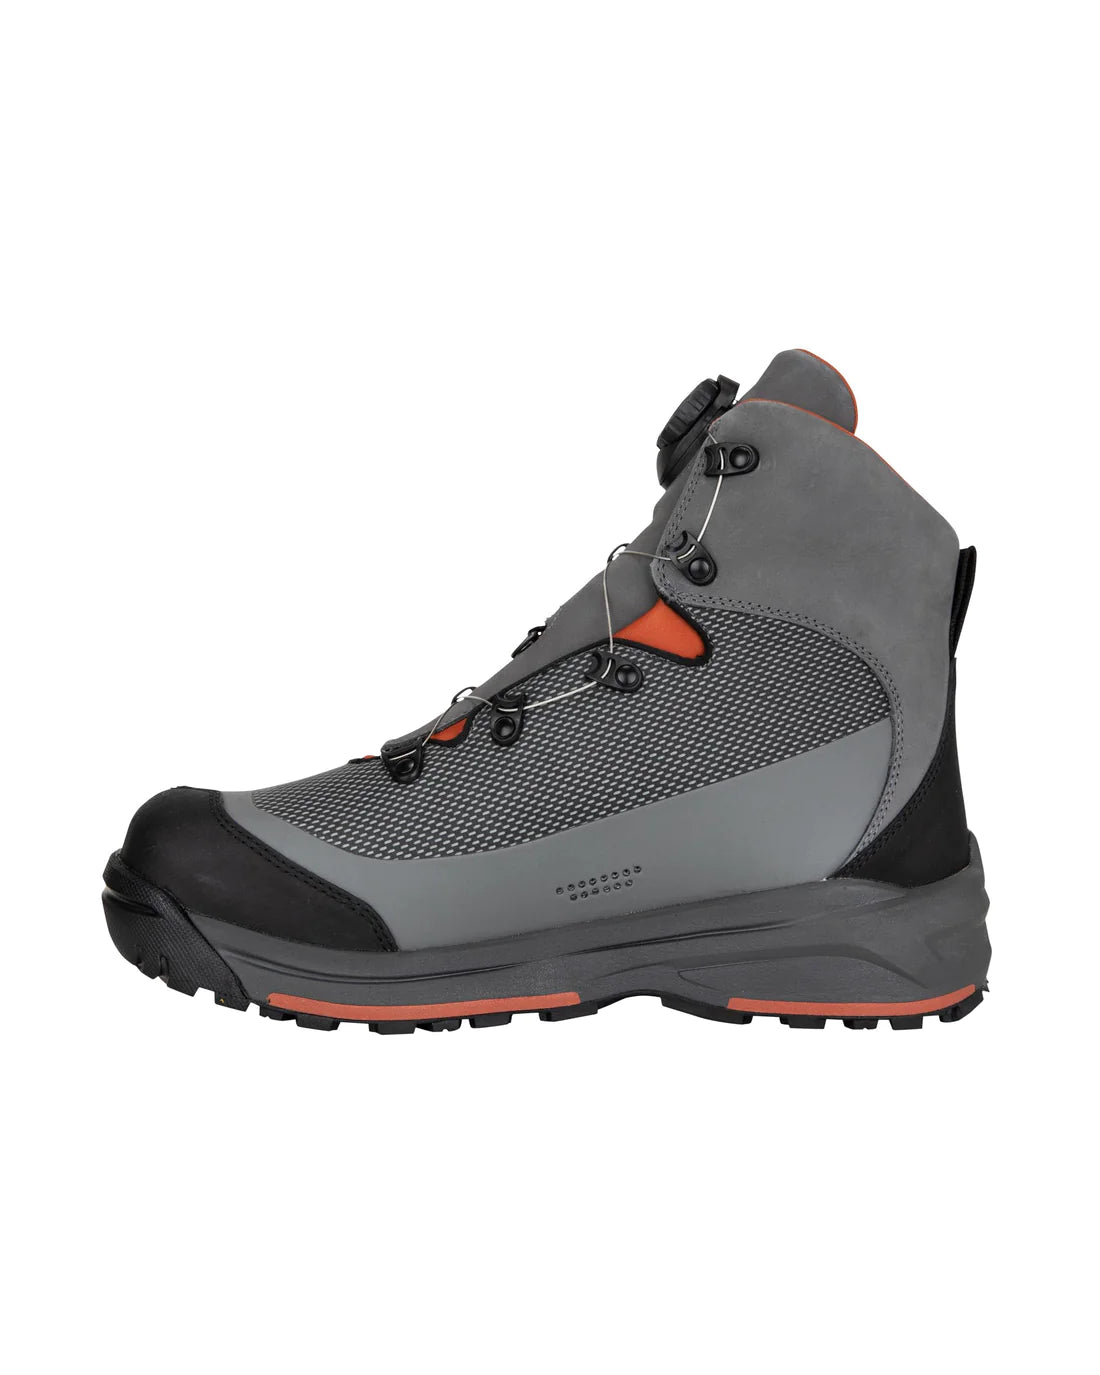 Simms Guide BOA Wading Boots -  - Mansfield Hunting & Fishing - Products to prepare for Corona Virus